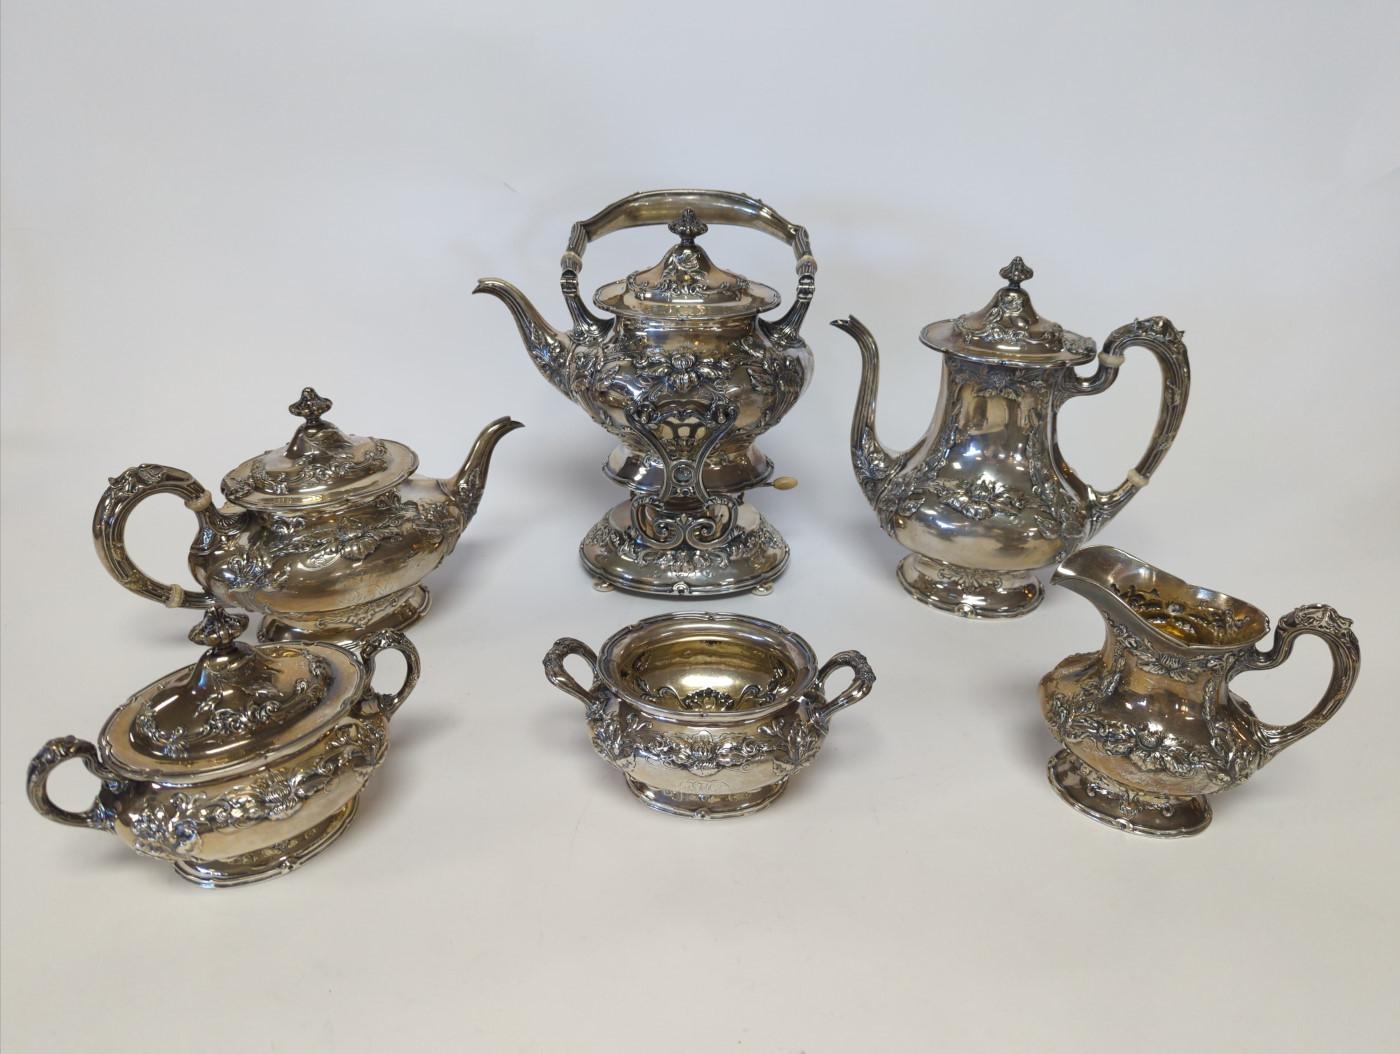 Maker: Gorham
Composition: sterling silver
Type: tea service set
Pattern: Imperial Chrysanthemum
Markings: Lion, Anchor, G, Sterling, A7433
Monogrammed: Yes, looks like the letters are BRC
Number of Pieces: 6
Coffee Pot ~ 27.33ozt, 10?H x